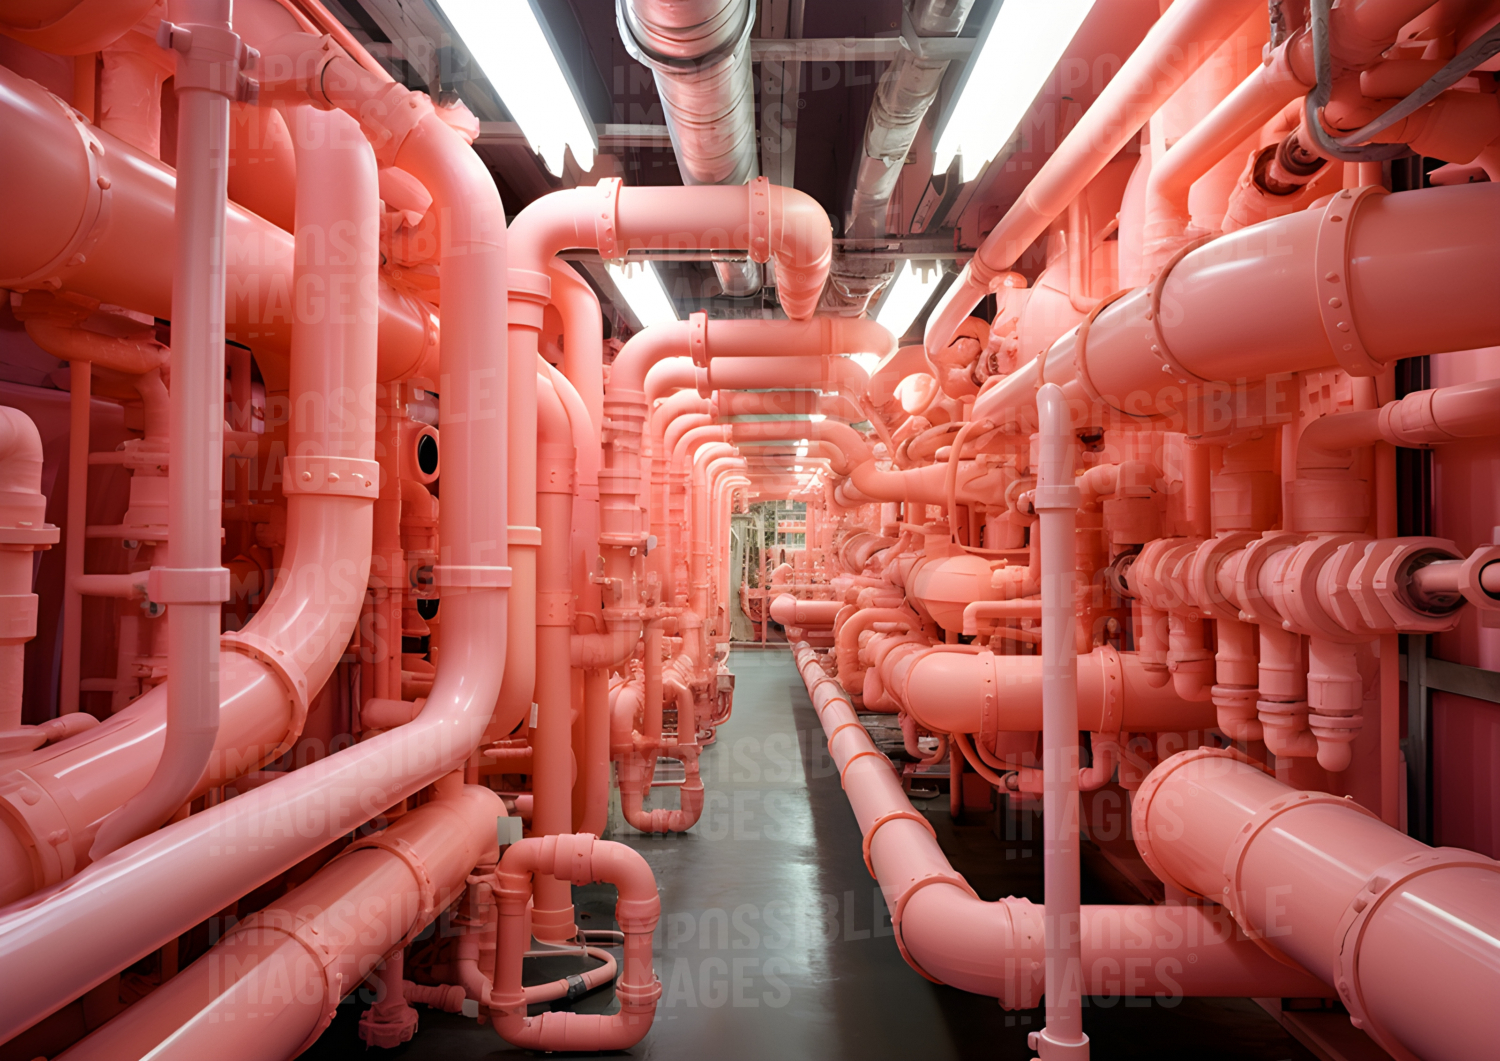 Complex pink pipes and pipework